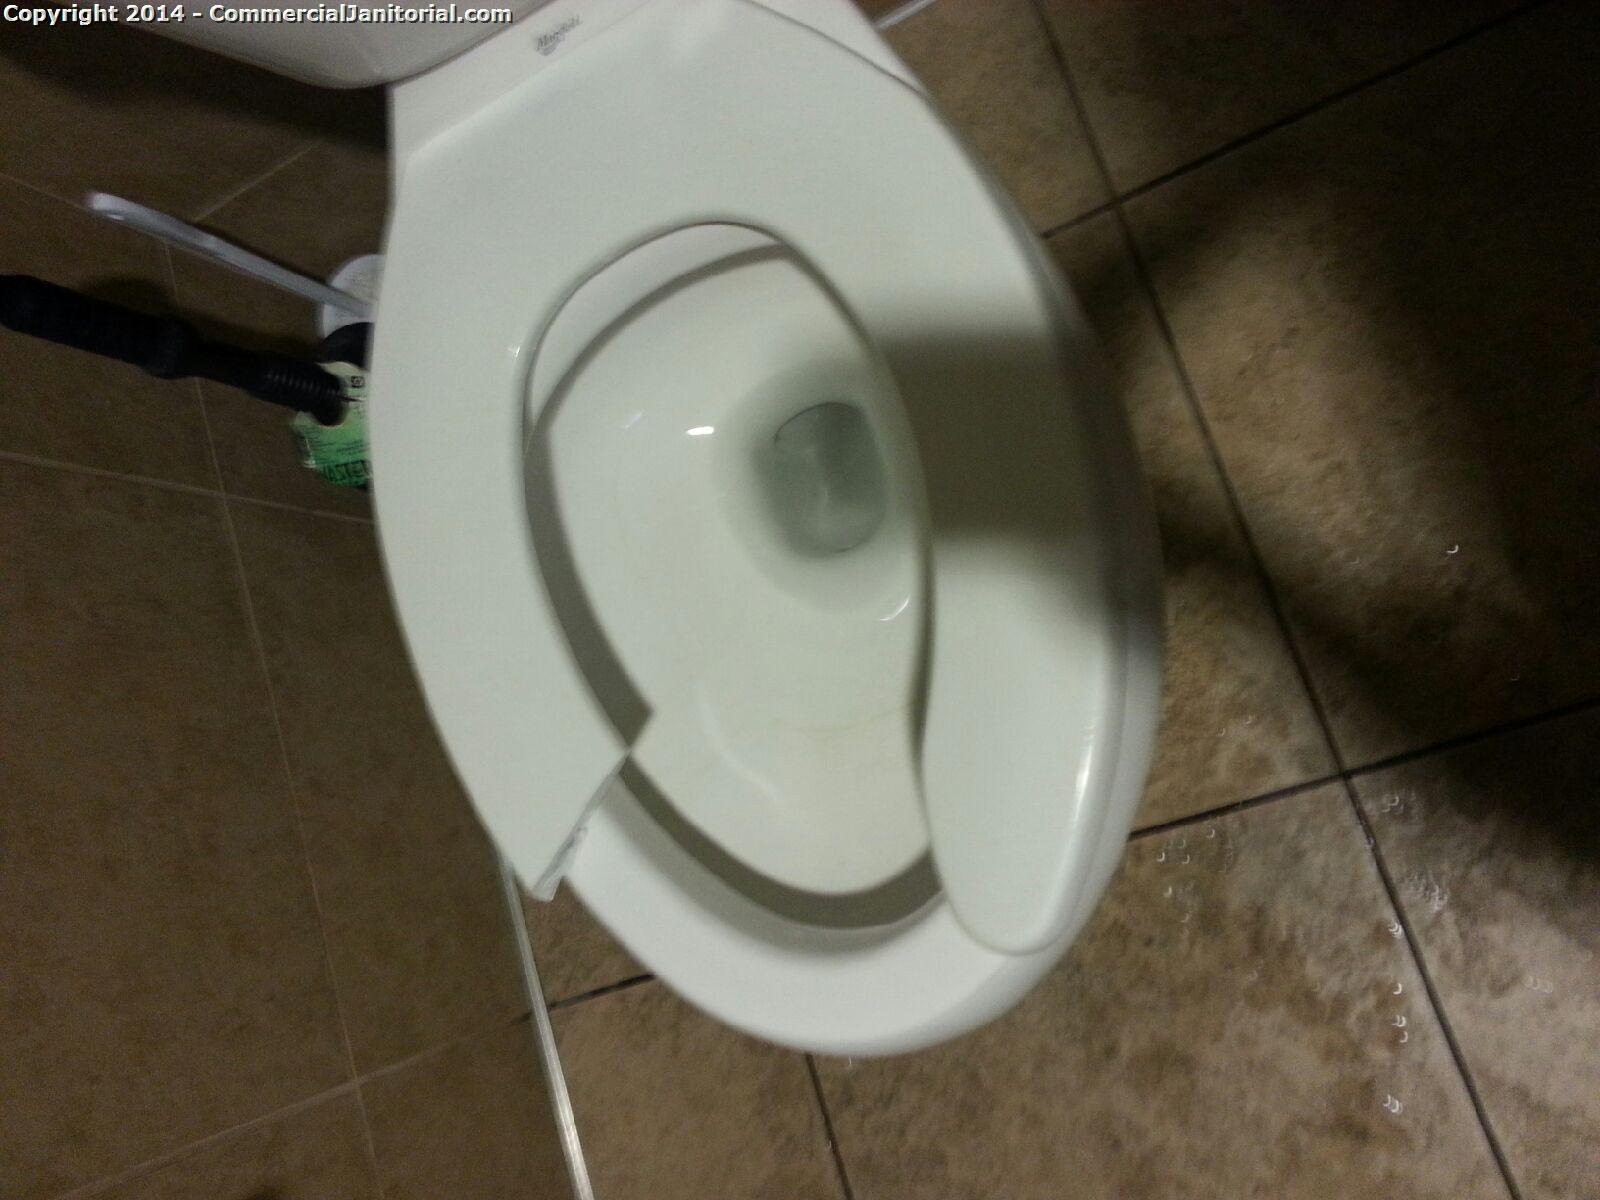 7/28-

Alex reporting in.

Yep, broken toilet seat.  

Will go to store/get new seat, and replace.

Client will be very happy in the morning.

Alex